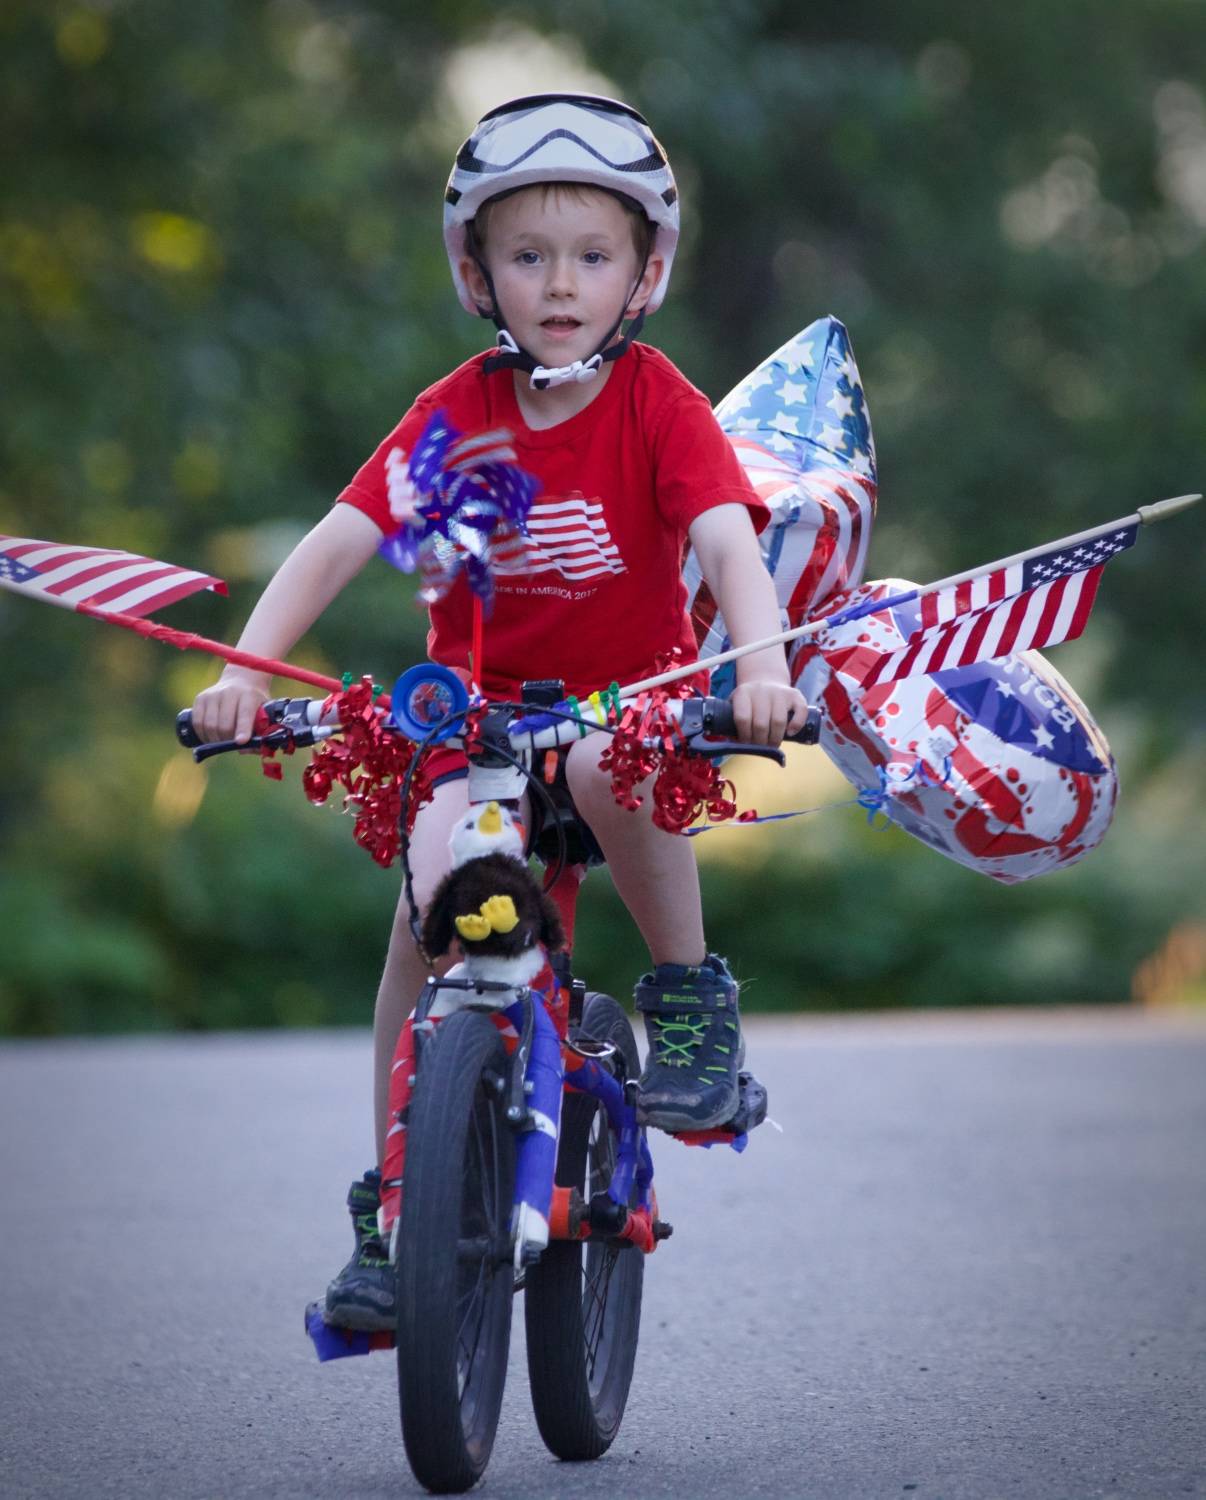 Alex Weiss is pictured riding his bike Wednesday, July 4, 2018. The Weiss family believes the bike, which won first place in the boys’ division of the Most Decorated Bicycle competition, was stolen after the annual Fourth of July parade in Douglas. (Derek Weiss | Courtesy Photo)